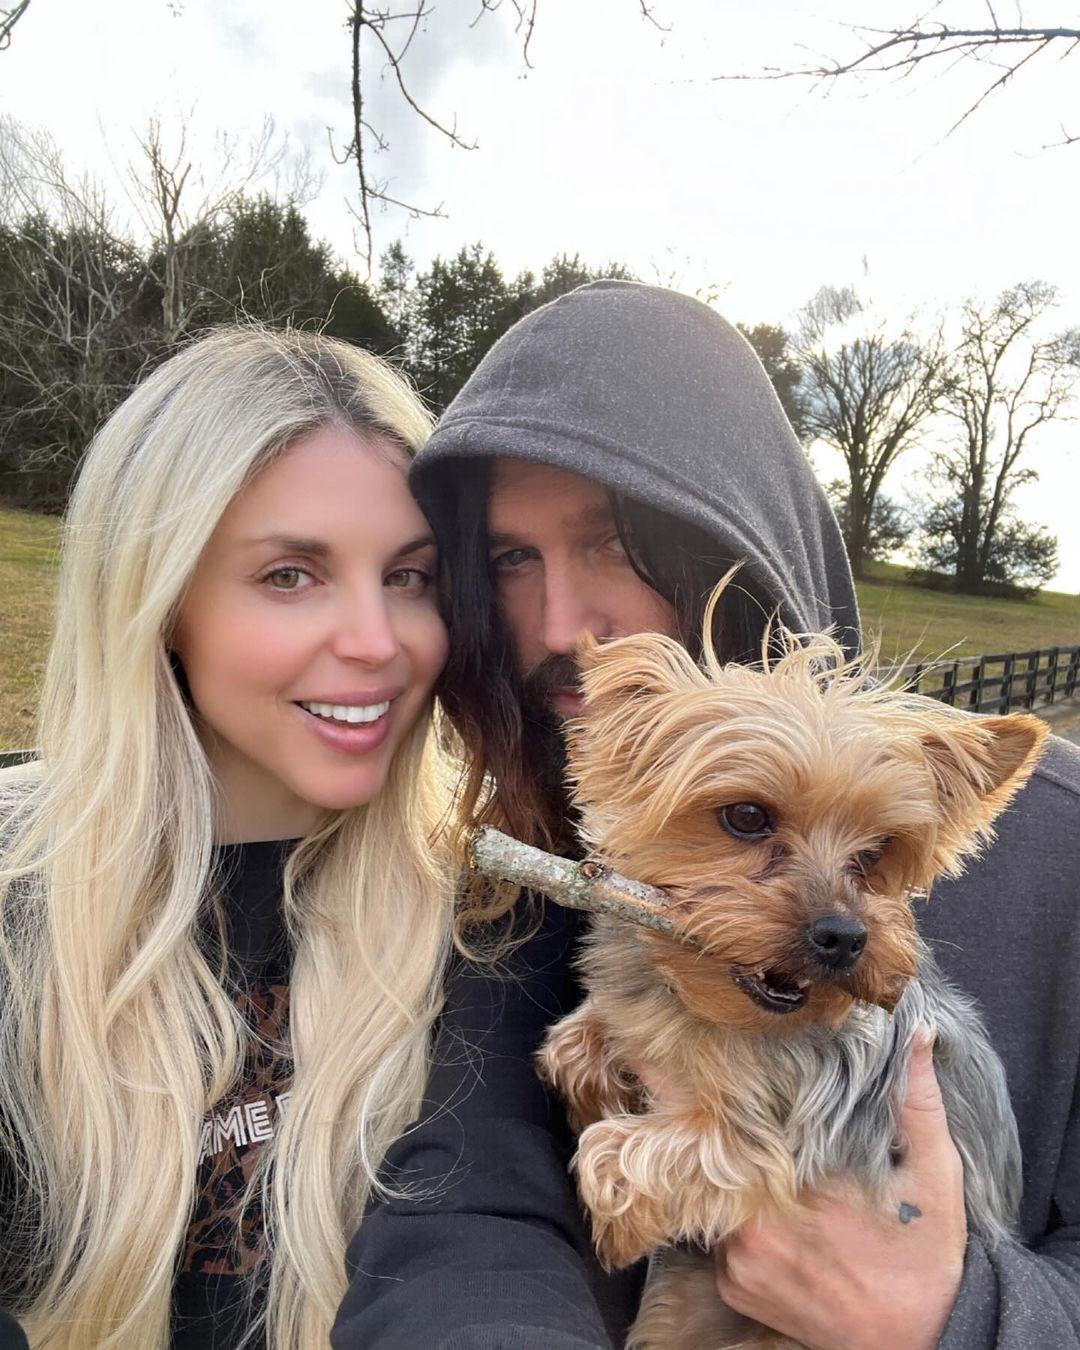 Billy Ray Cyrus and Firerose holding a dog